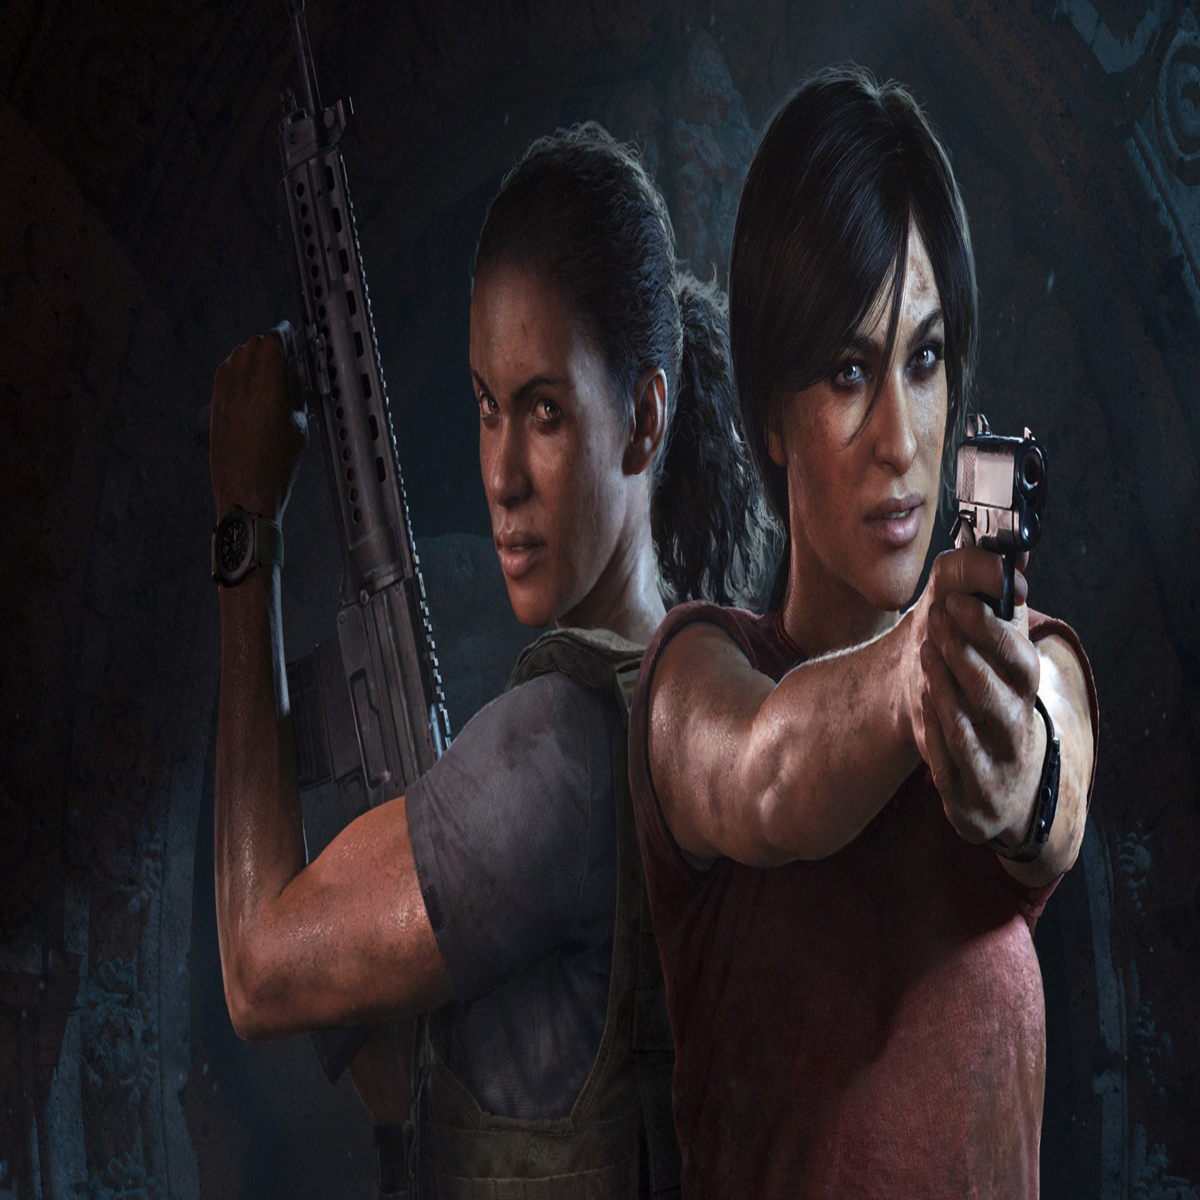 The Uncharted: Legacy of Thieves Collection swings with extra Hz